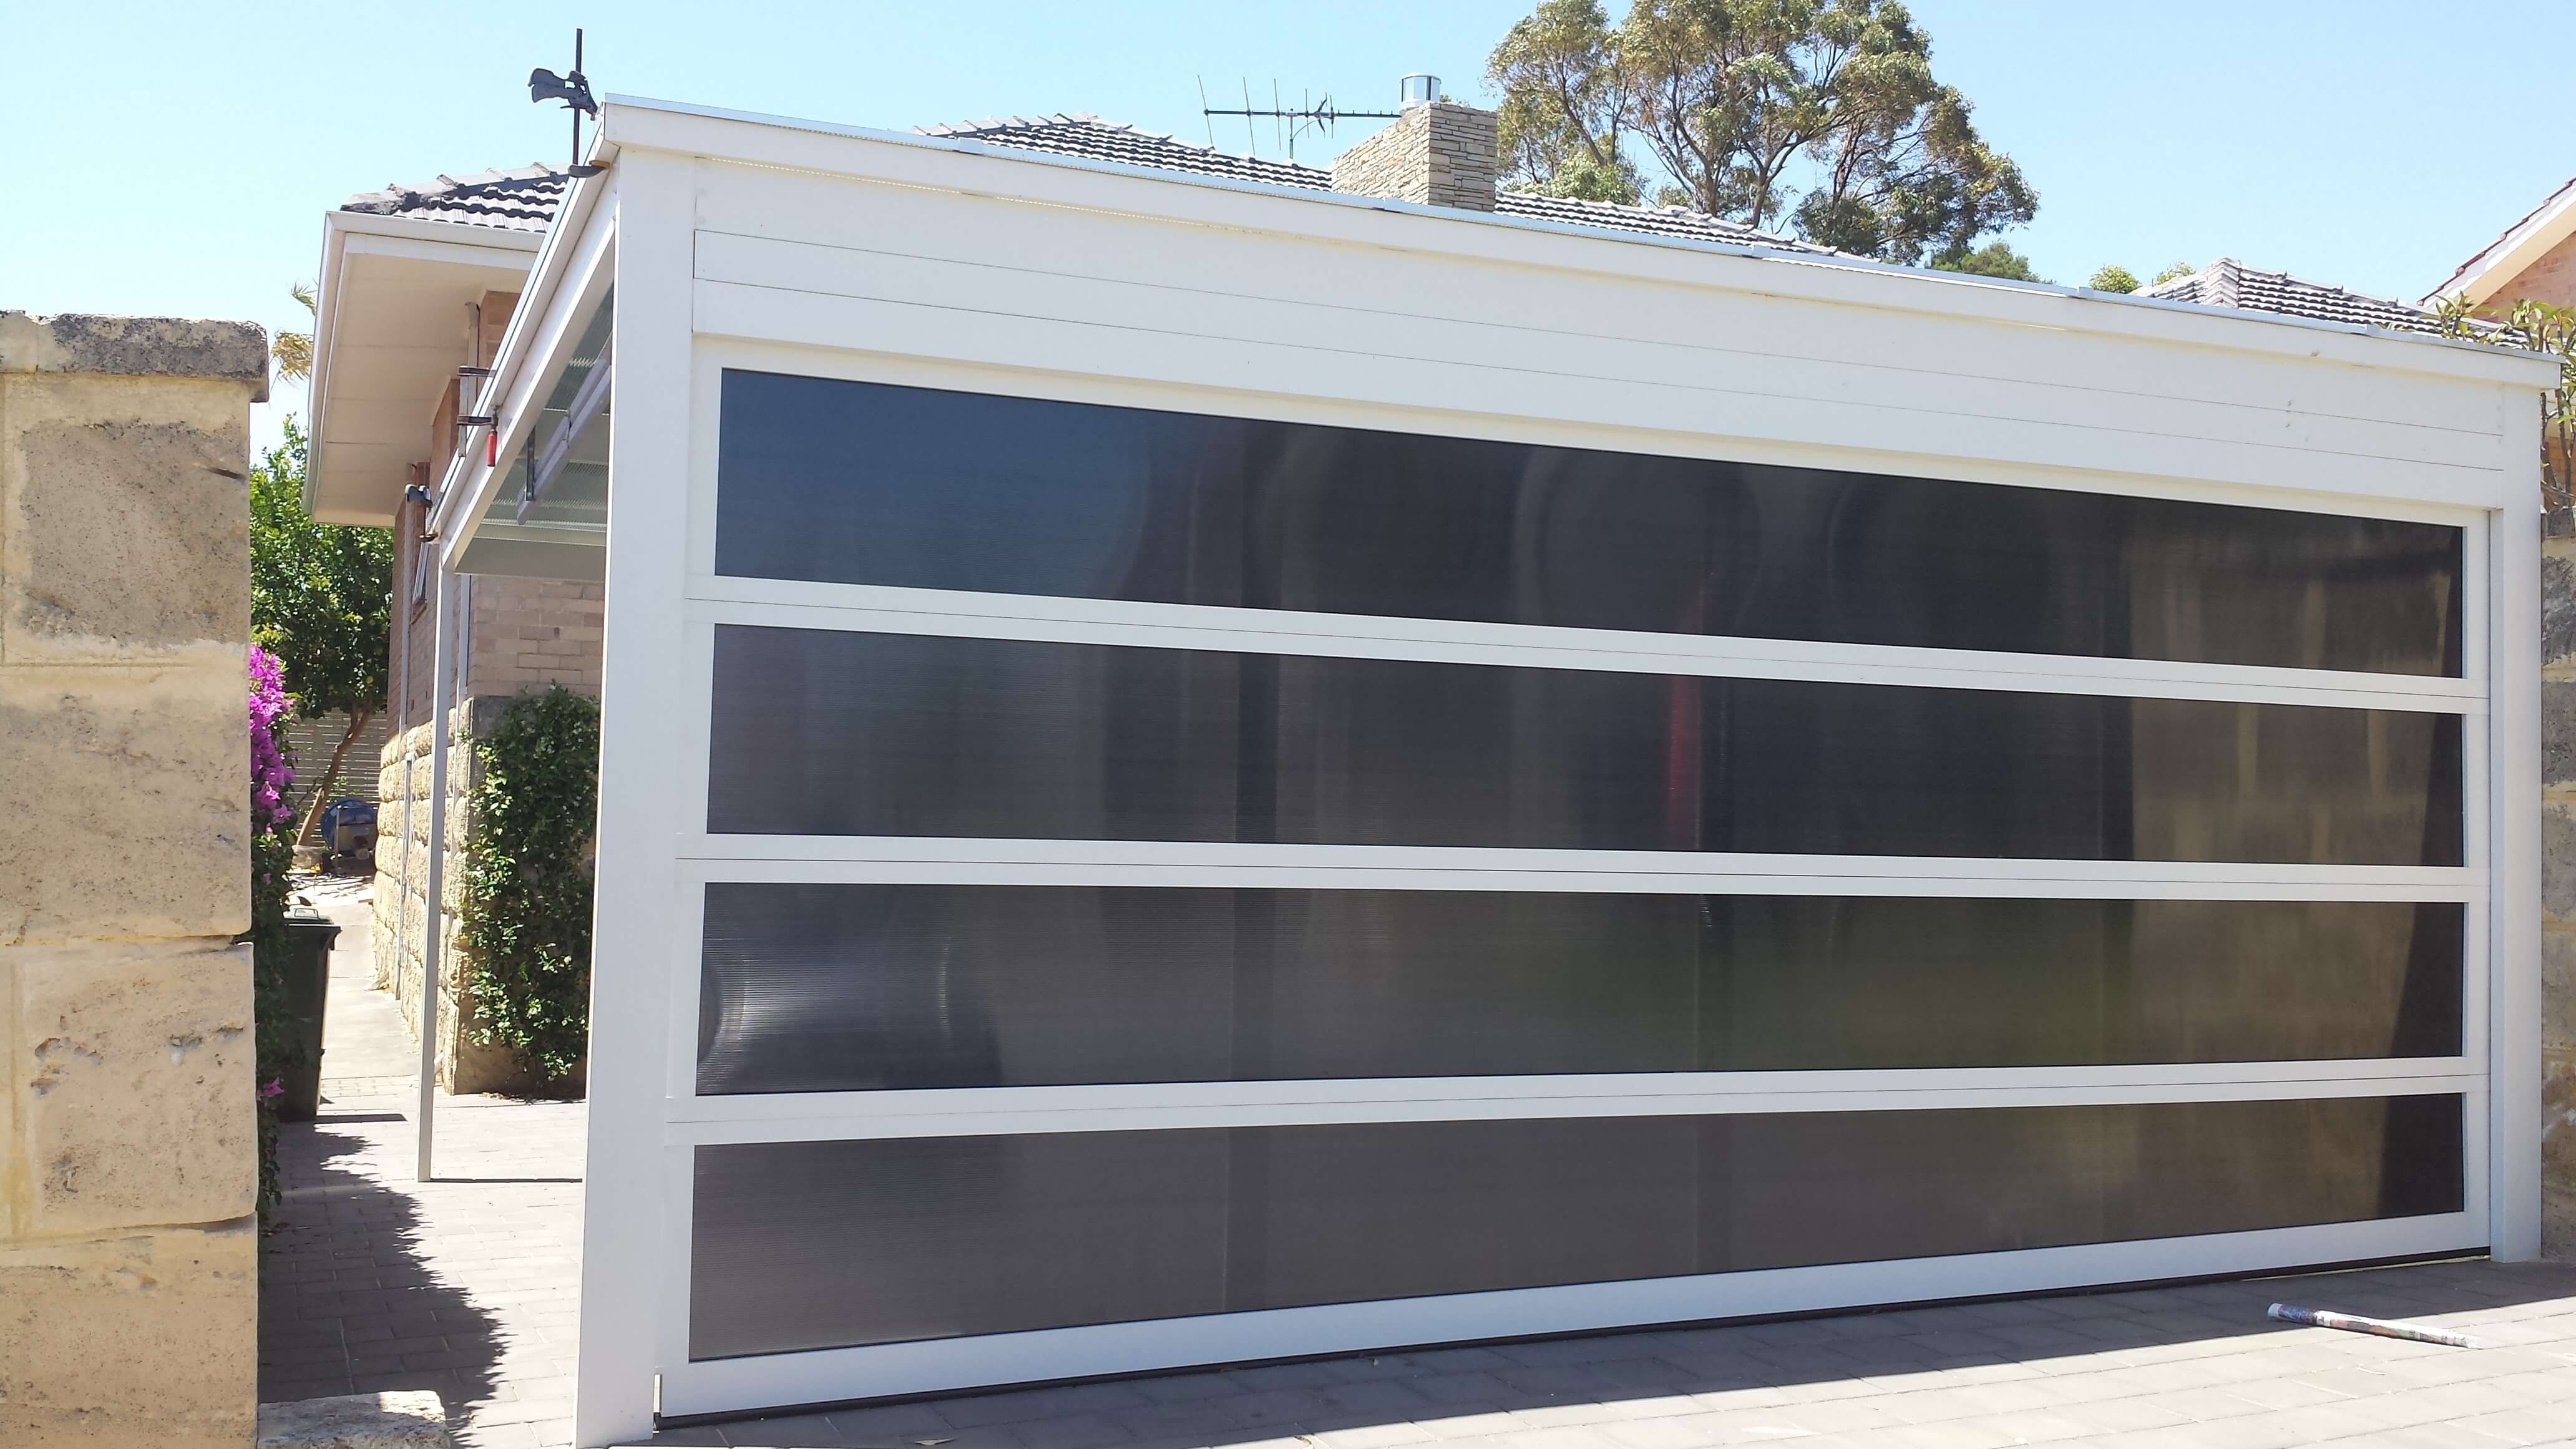  Garage Door Design Perth for Small Space